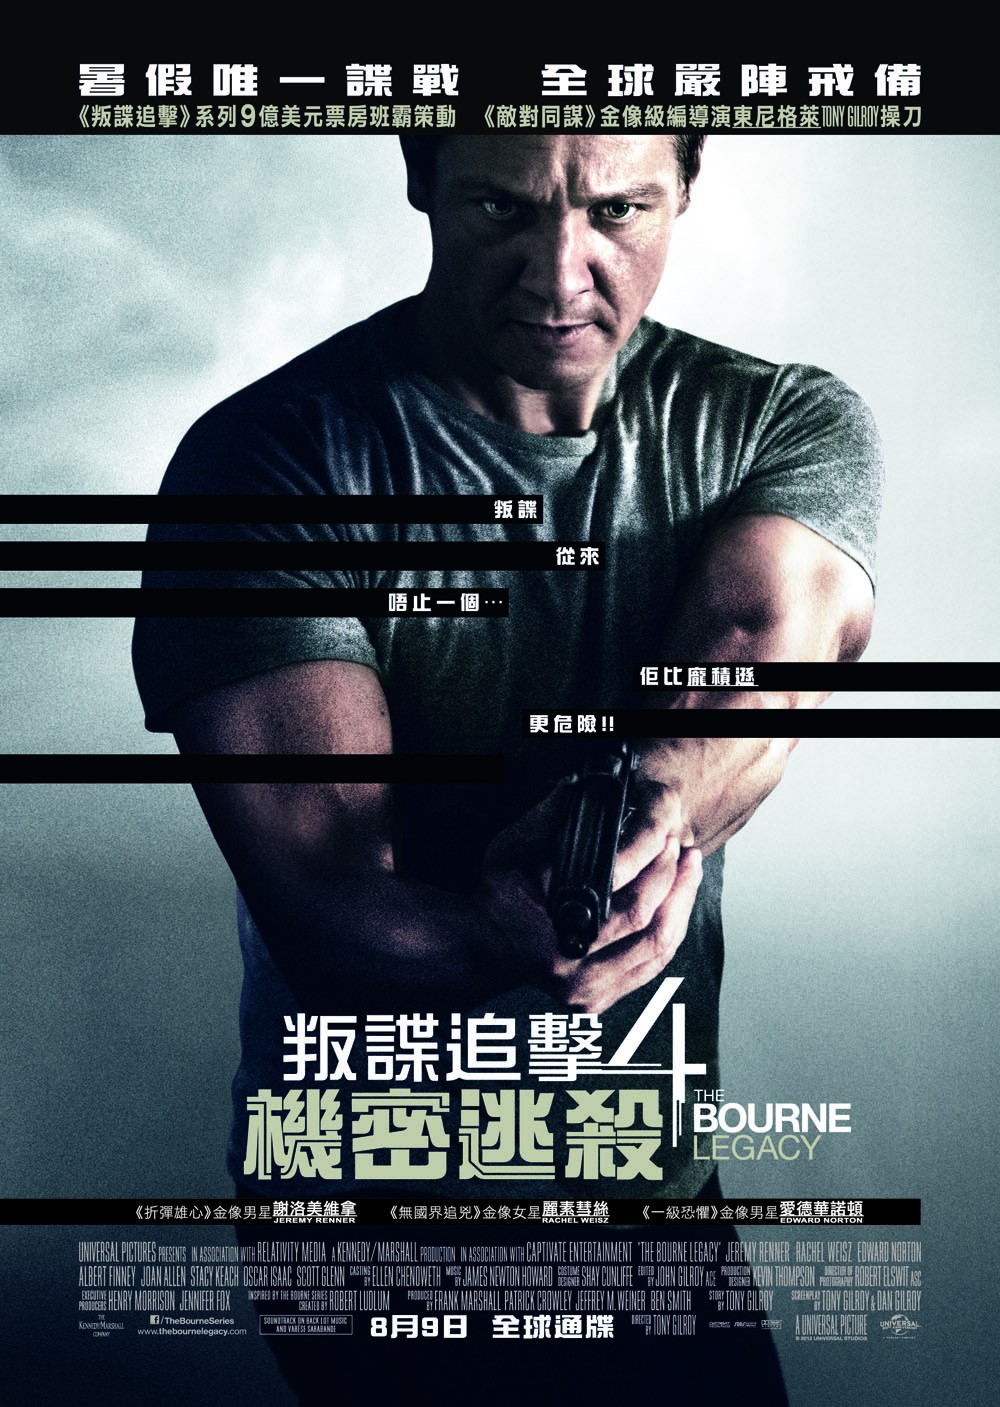 Extra Large Movie Poster Image for The Bourne Legacy (#4 of 8)